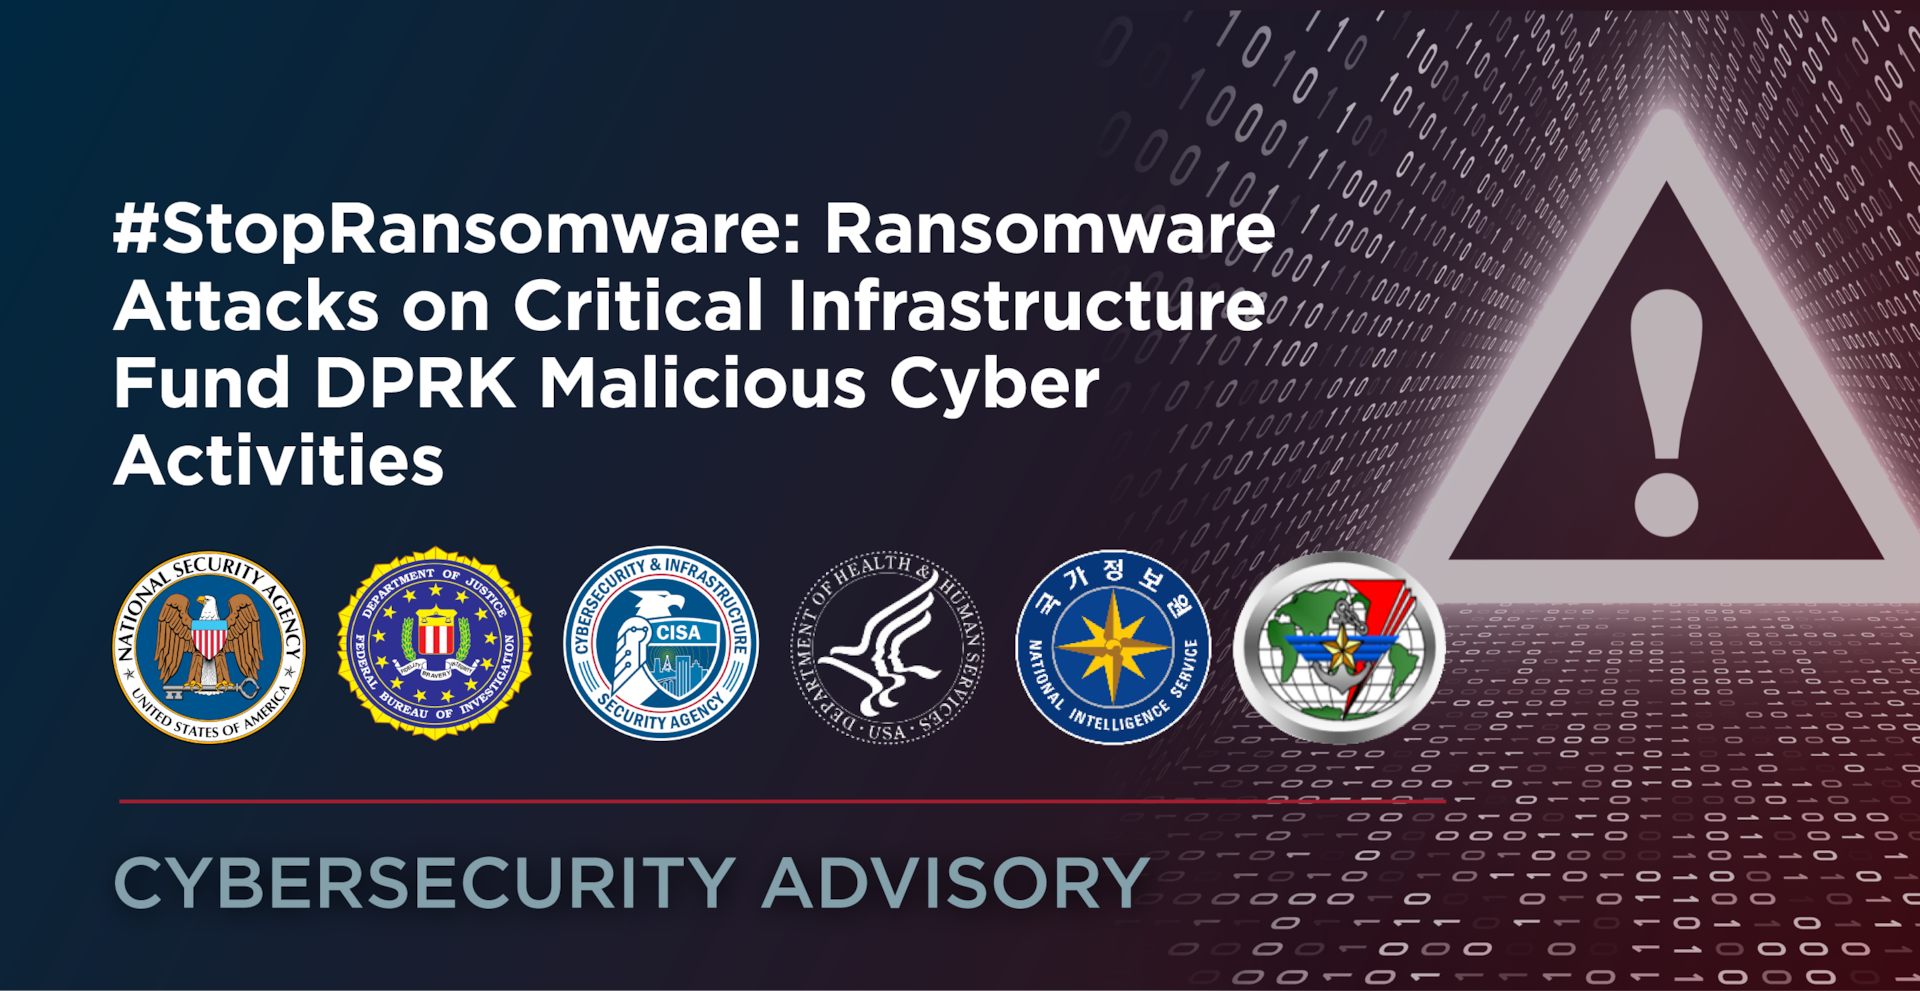 CSA: #StopRansomware: Ransomware Attacks on Critical Infrastructure Fund DPRK Malicious Cyber Activities